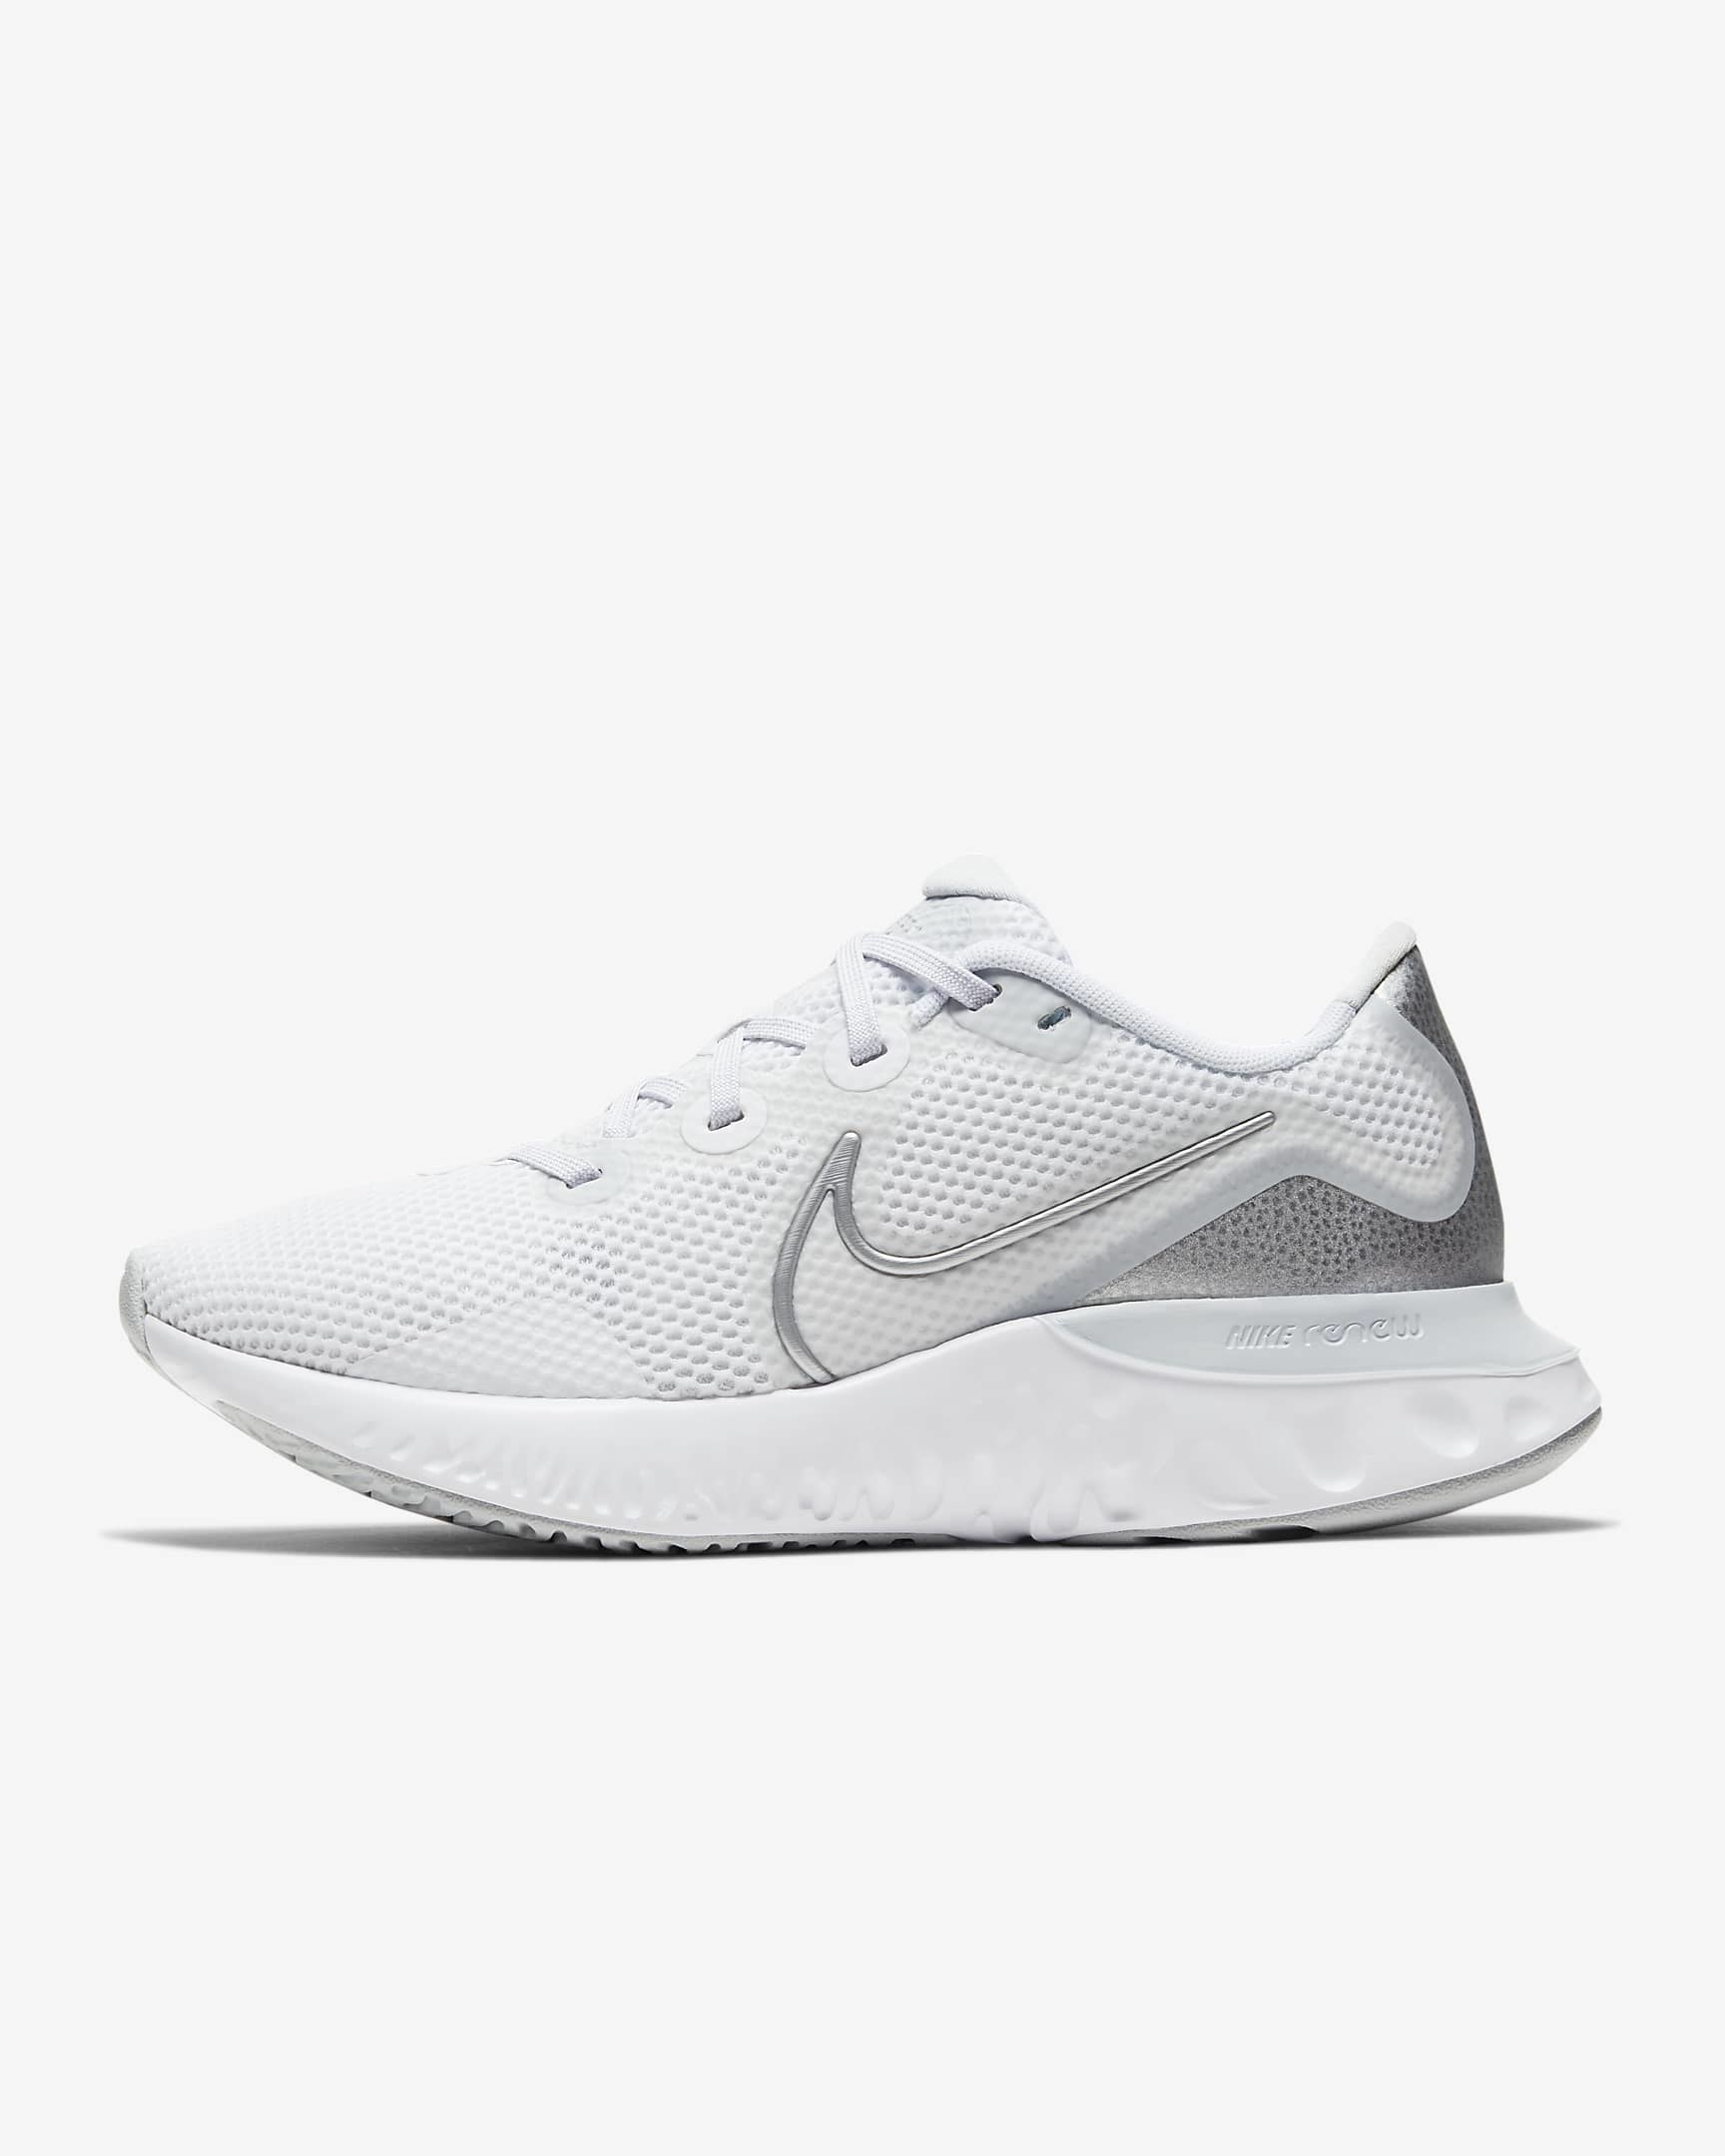 A pair of white nike sneakers